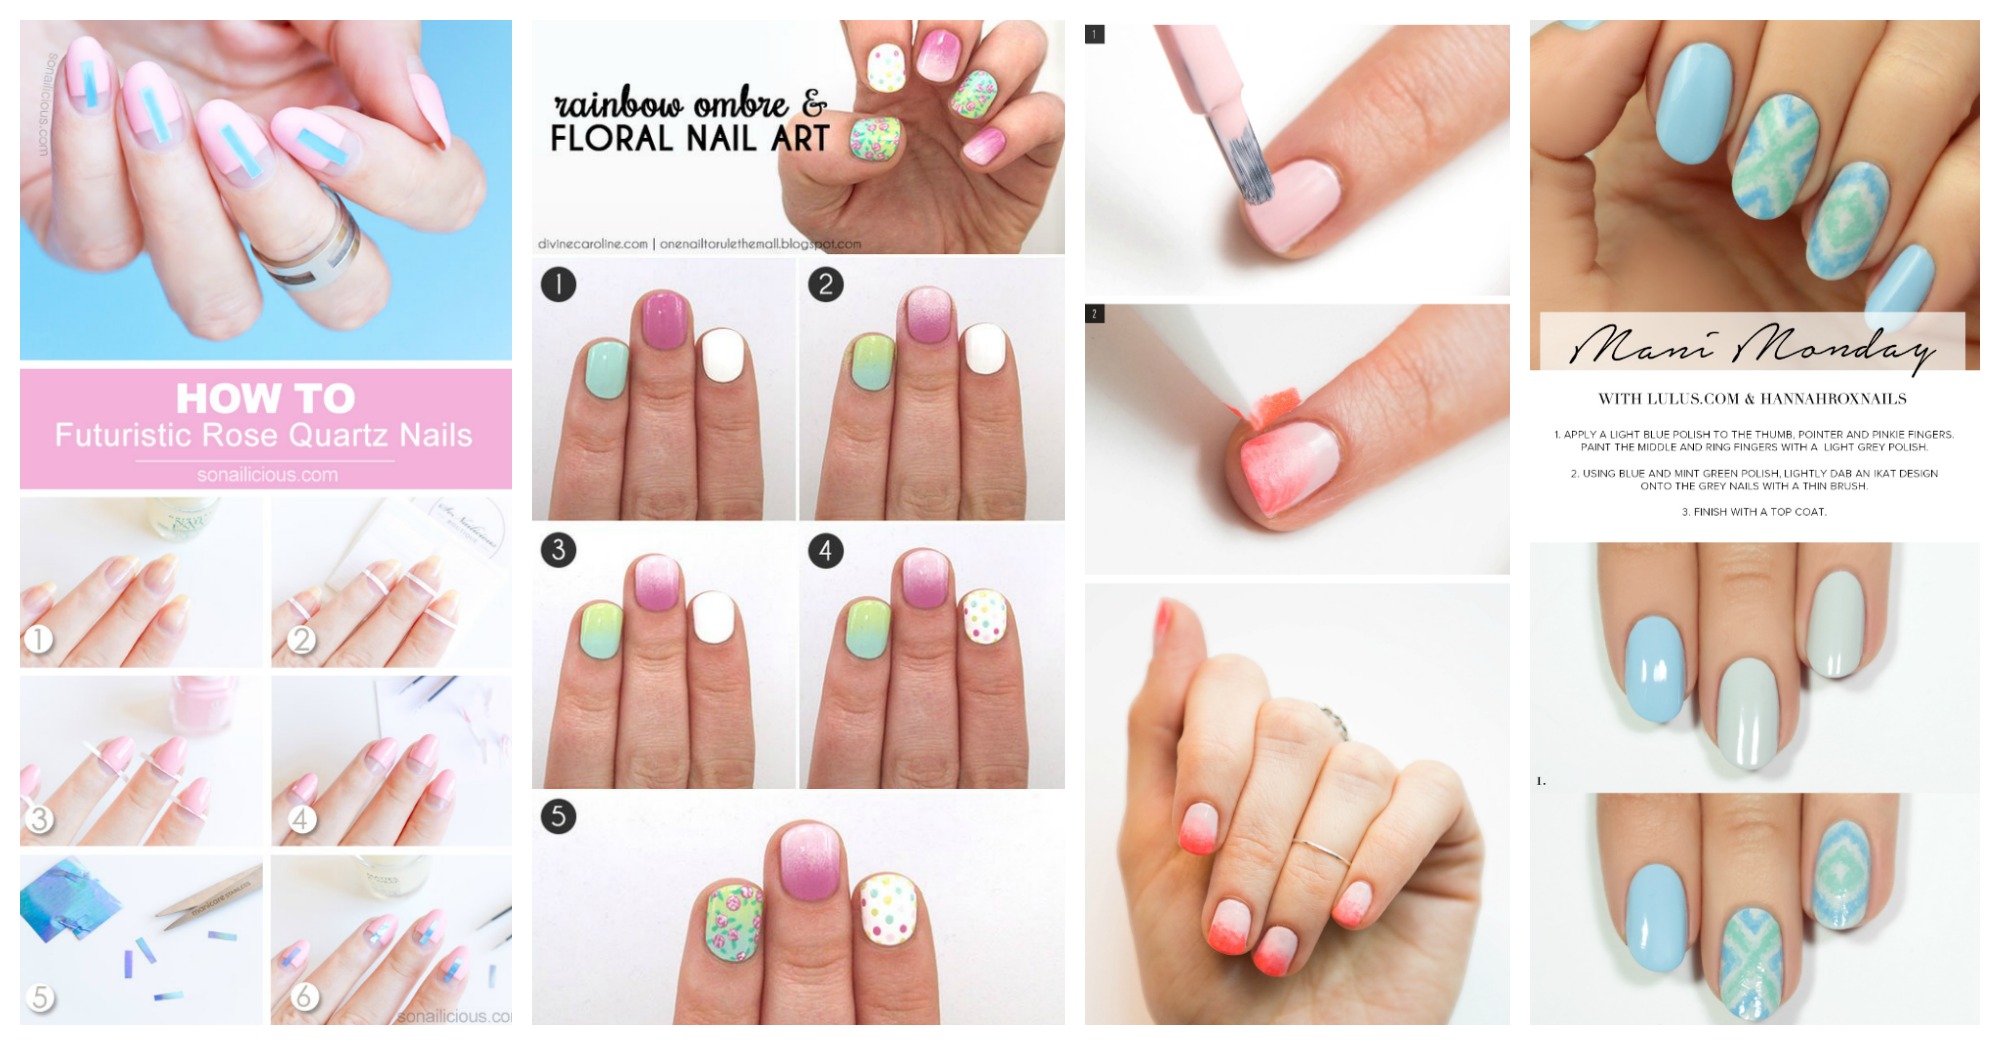 1. Step by Step Nail Design Tutorials - wide 4